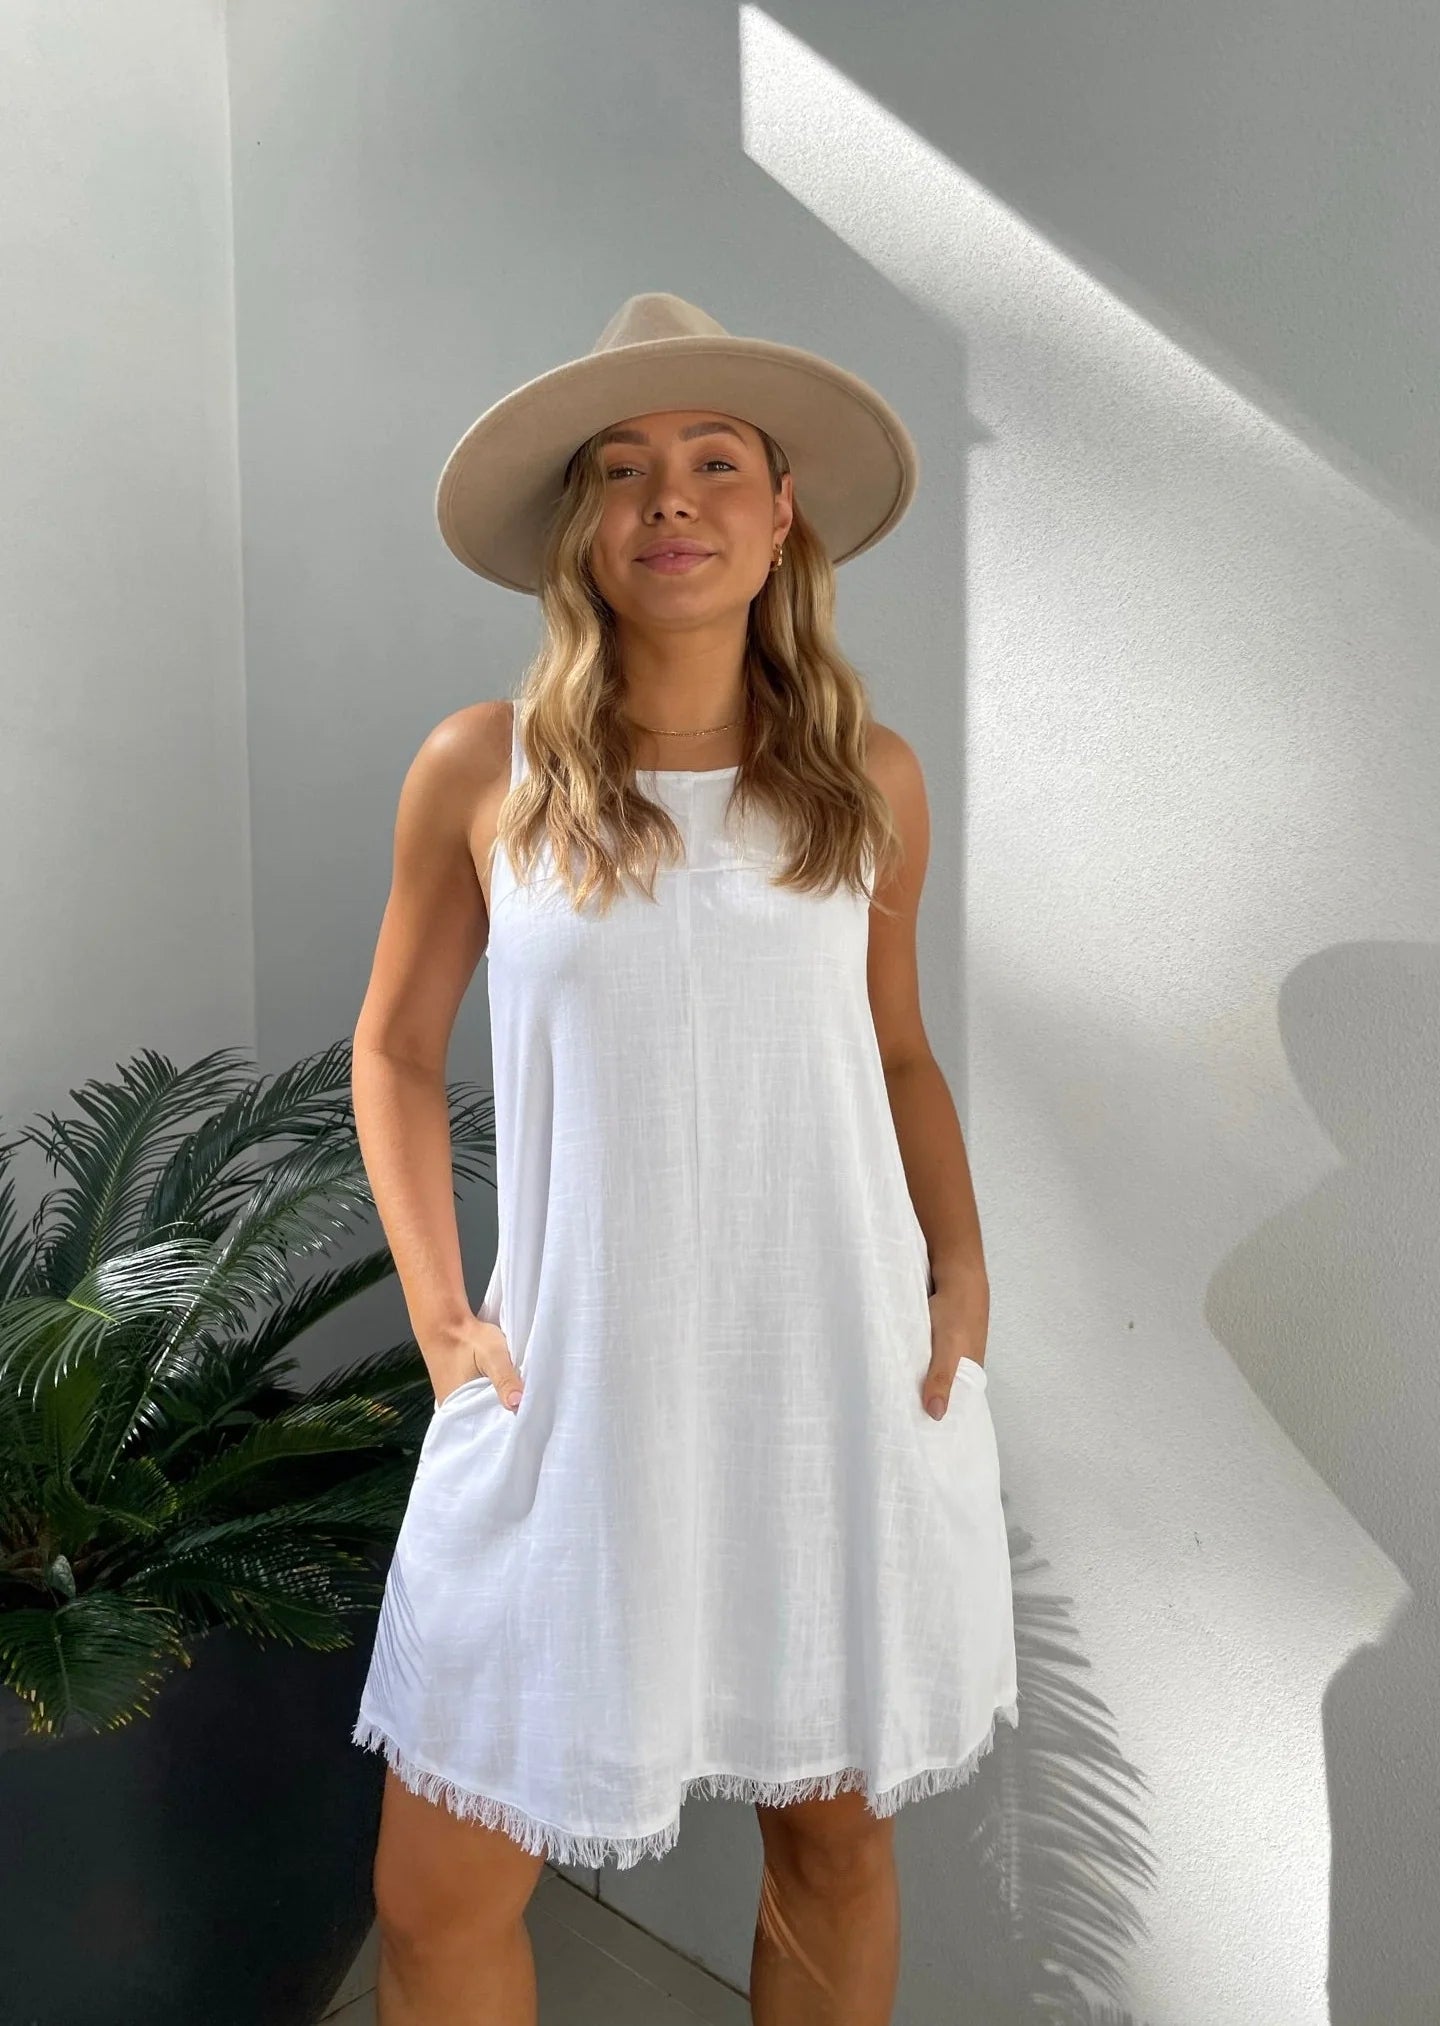 Add style and function to your wardrobe with the Freya Dress! This white dress features a frayed hem and shift fit, keeping you on trend. Plus, with convenient pockets and a comfortable lined interior, you'll never want to take it off. It's a must-have for any fashion-forward and practical individual!